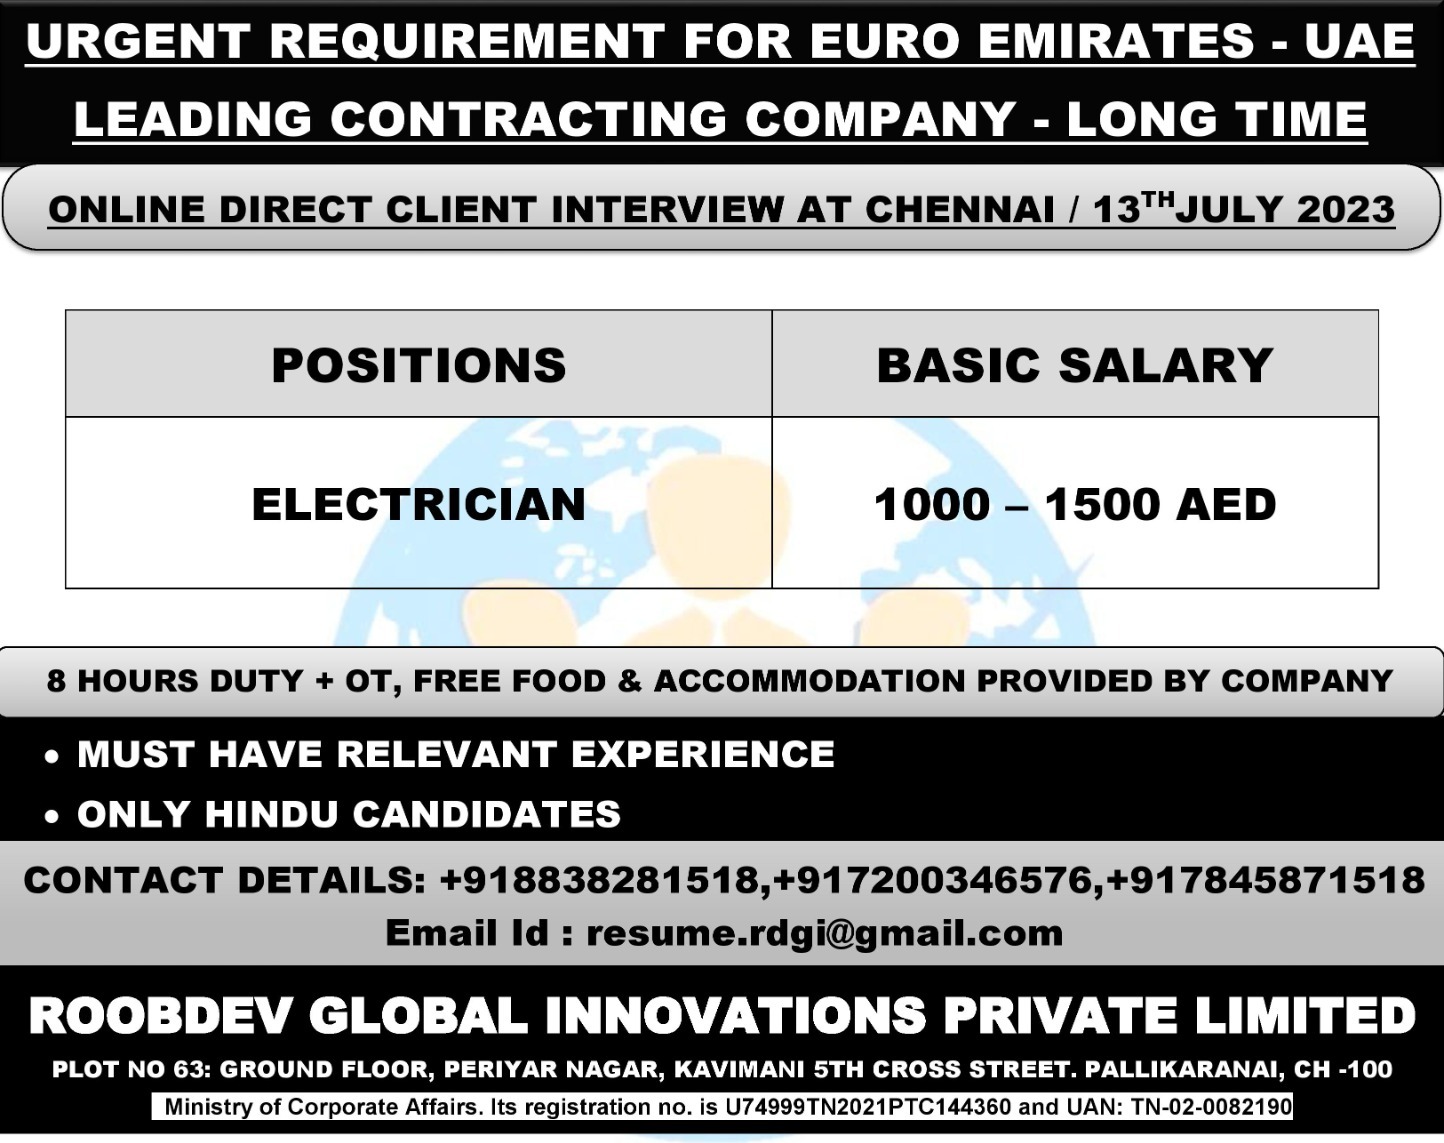 ONLINE INTERVIEW FOR UAE